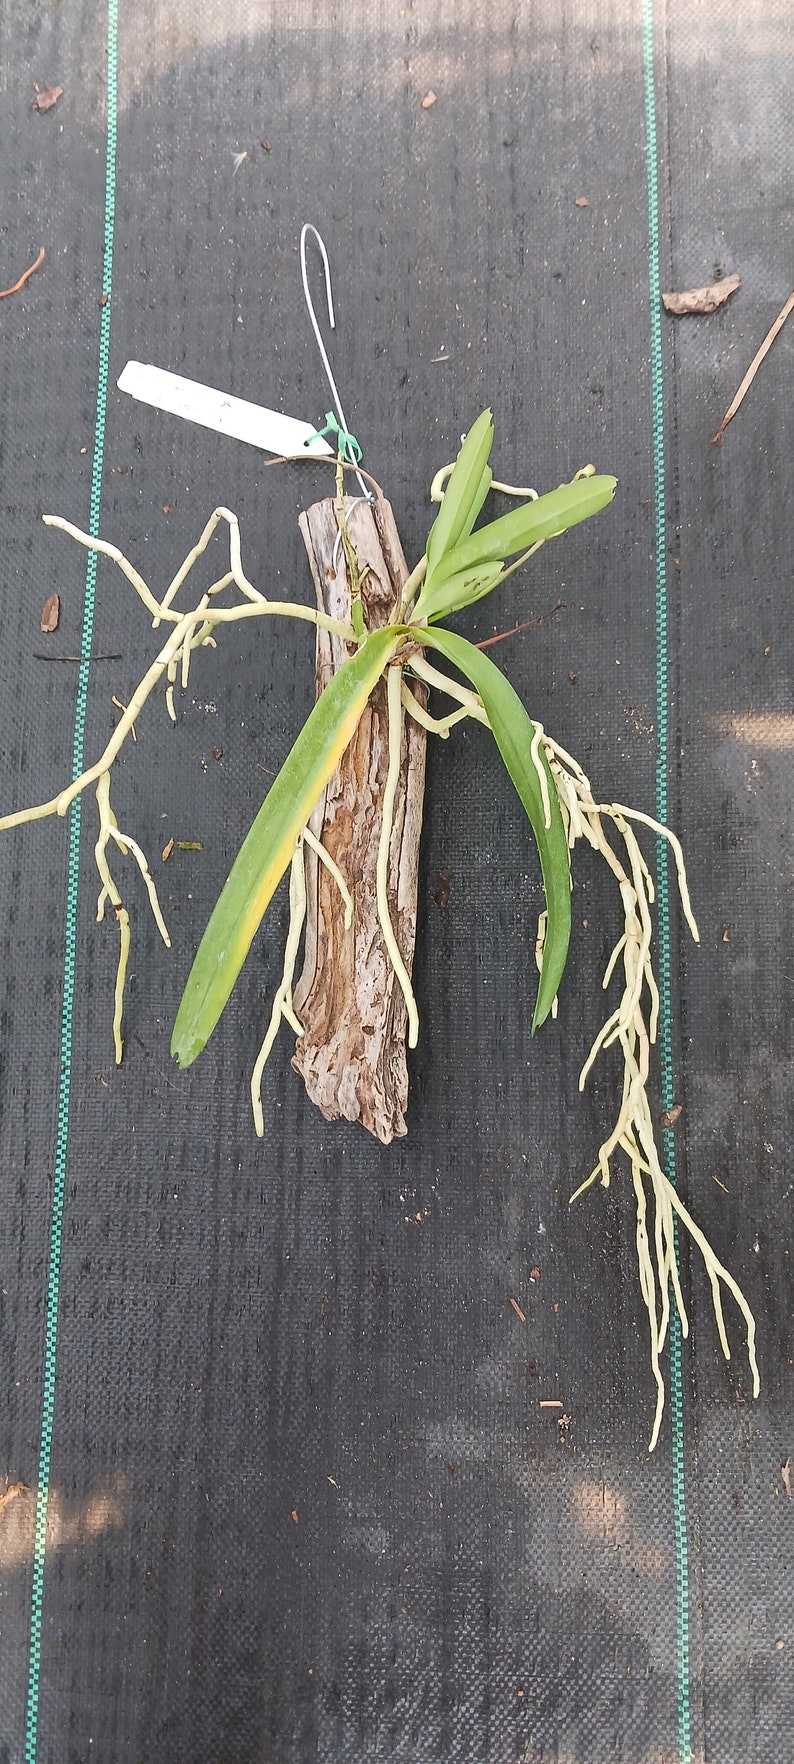 Orchid Vanda Banshee V loiuvillei x insignis mounted on driftwood Hanging Plants image 5